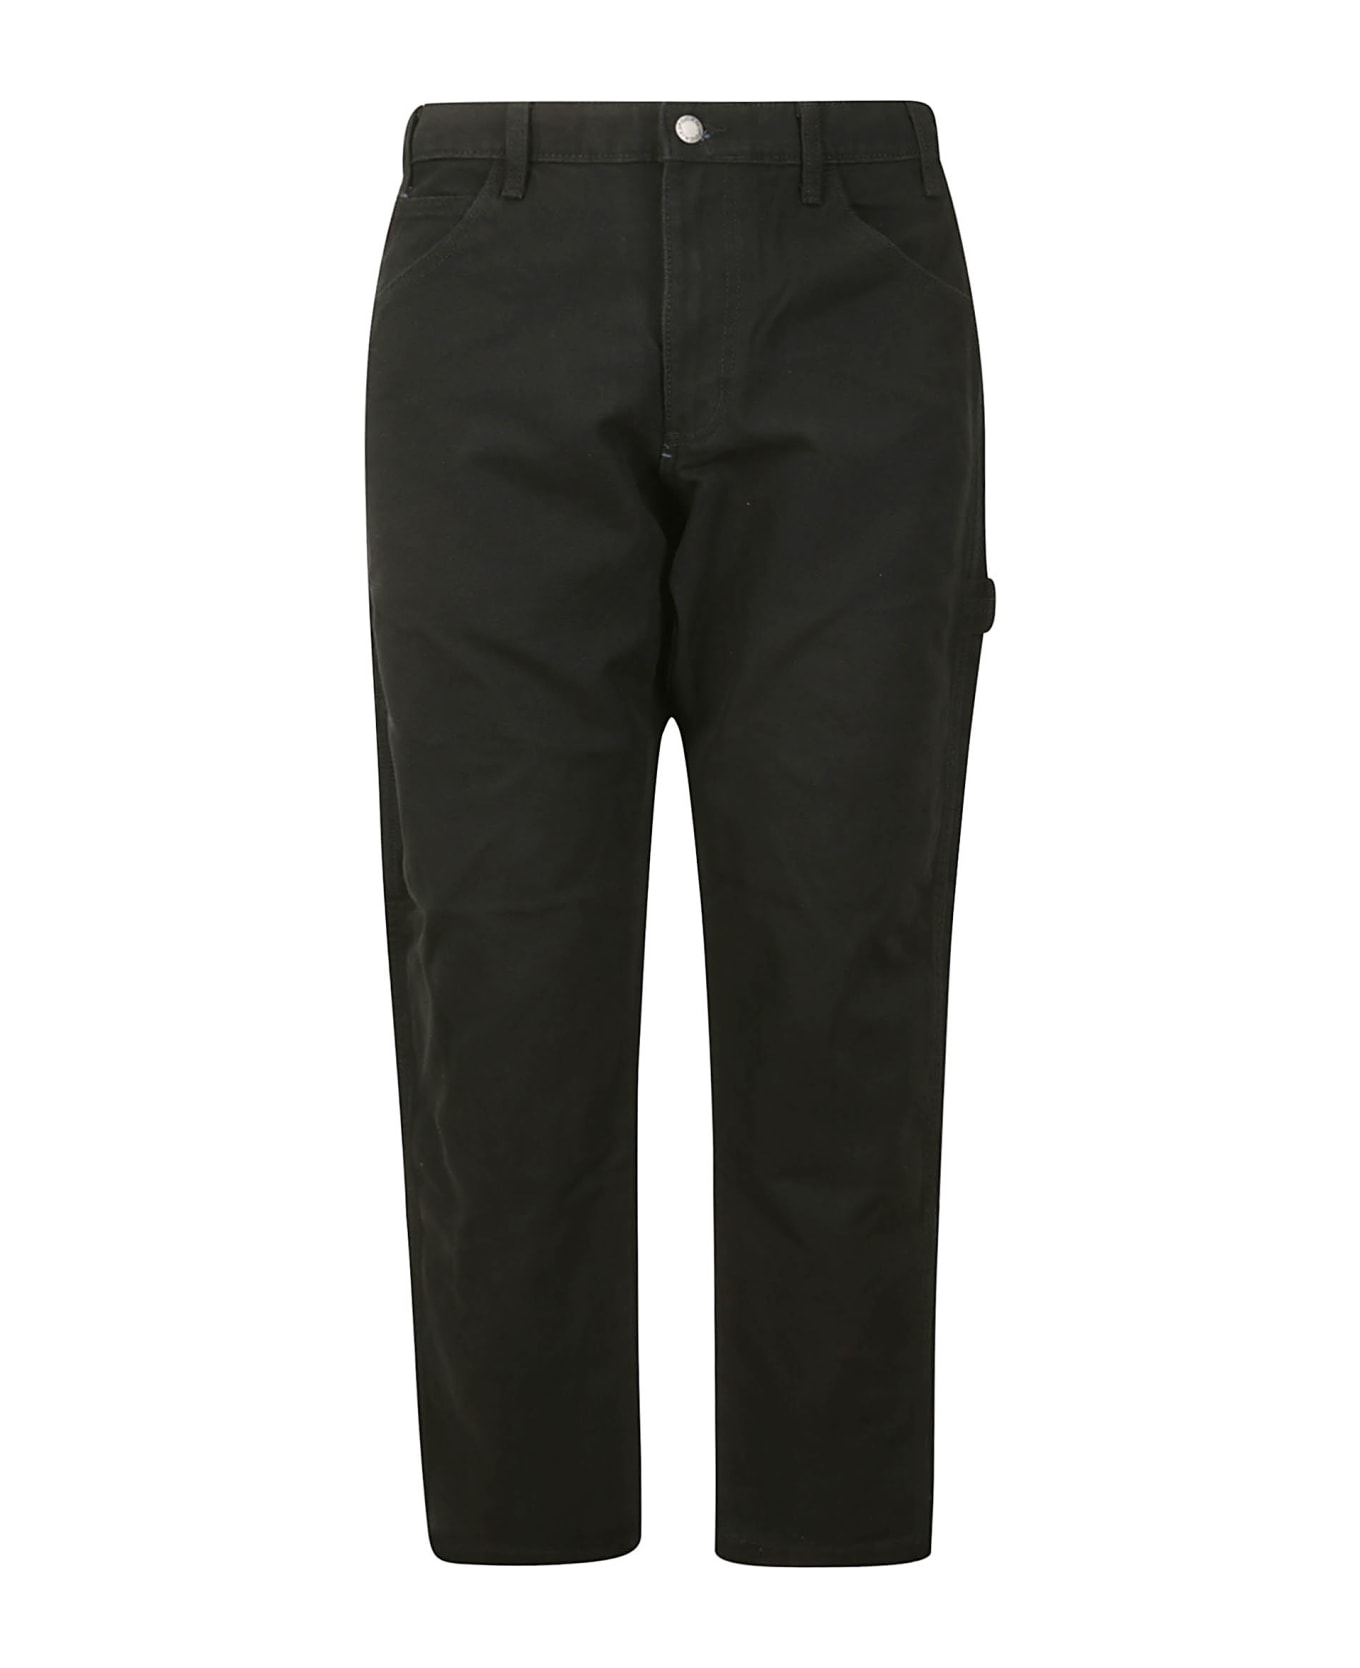 Dickies Duck Carpenter Pant Stone Washed Black - SW BLACK